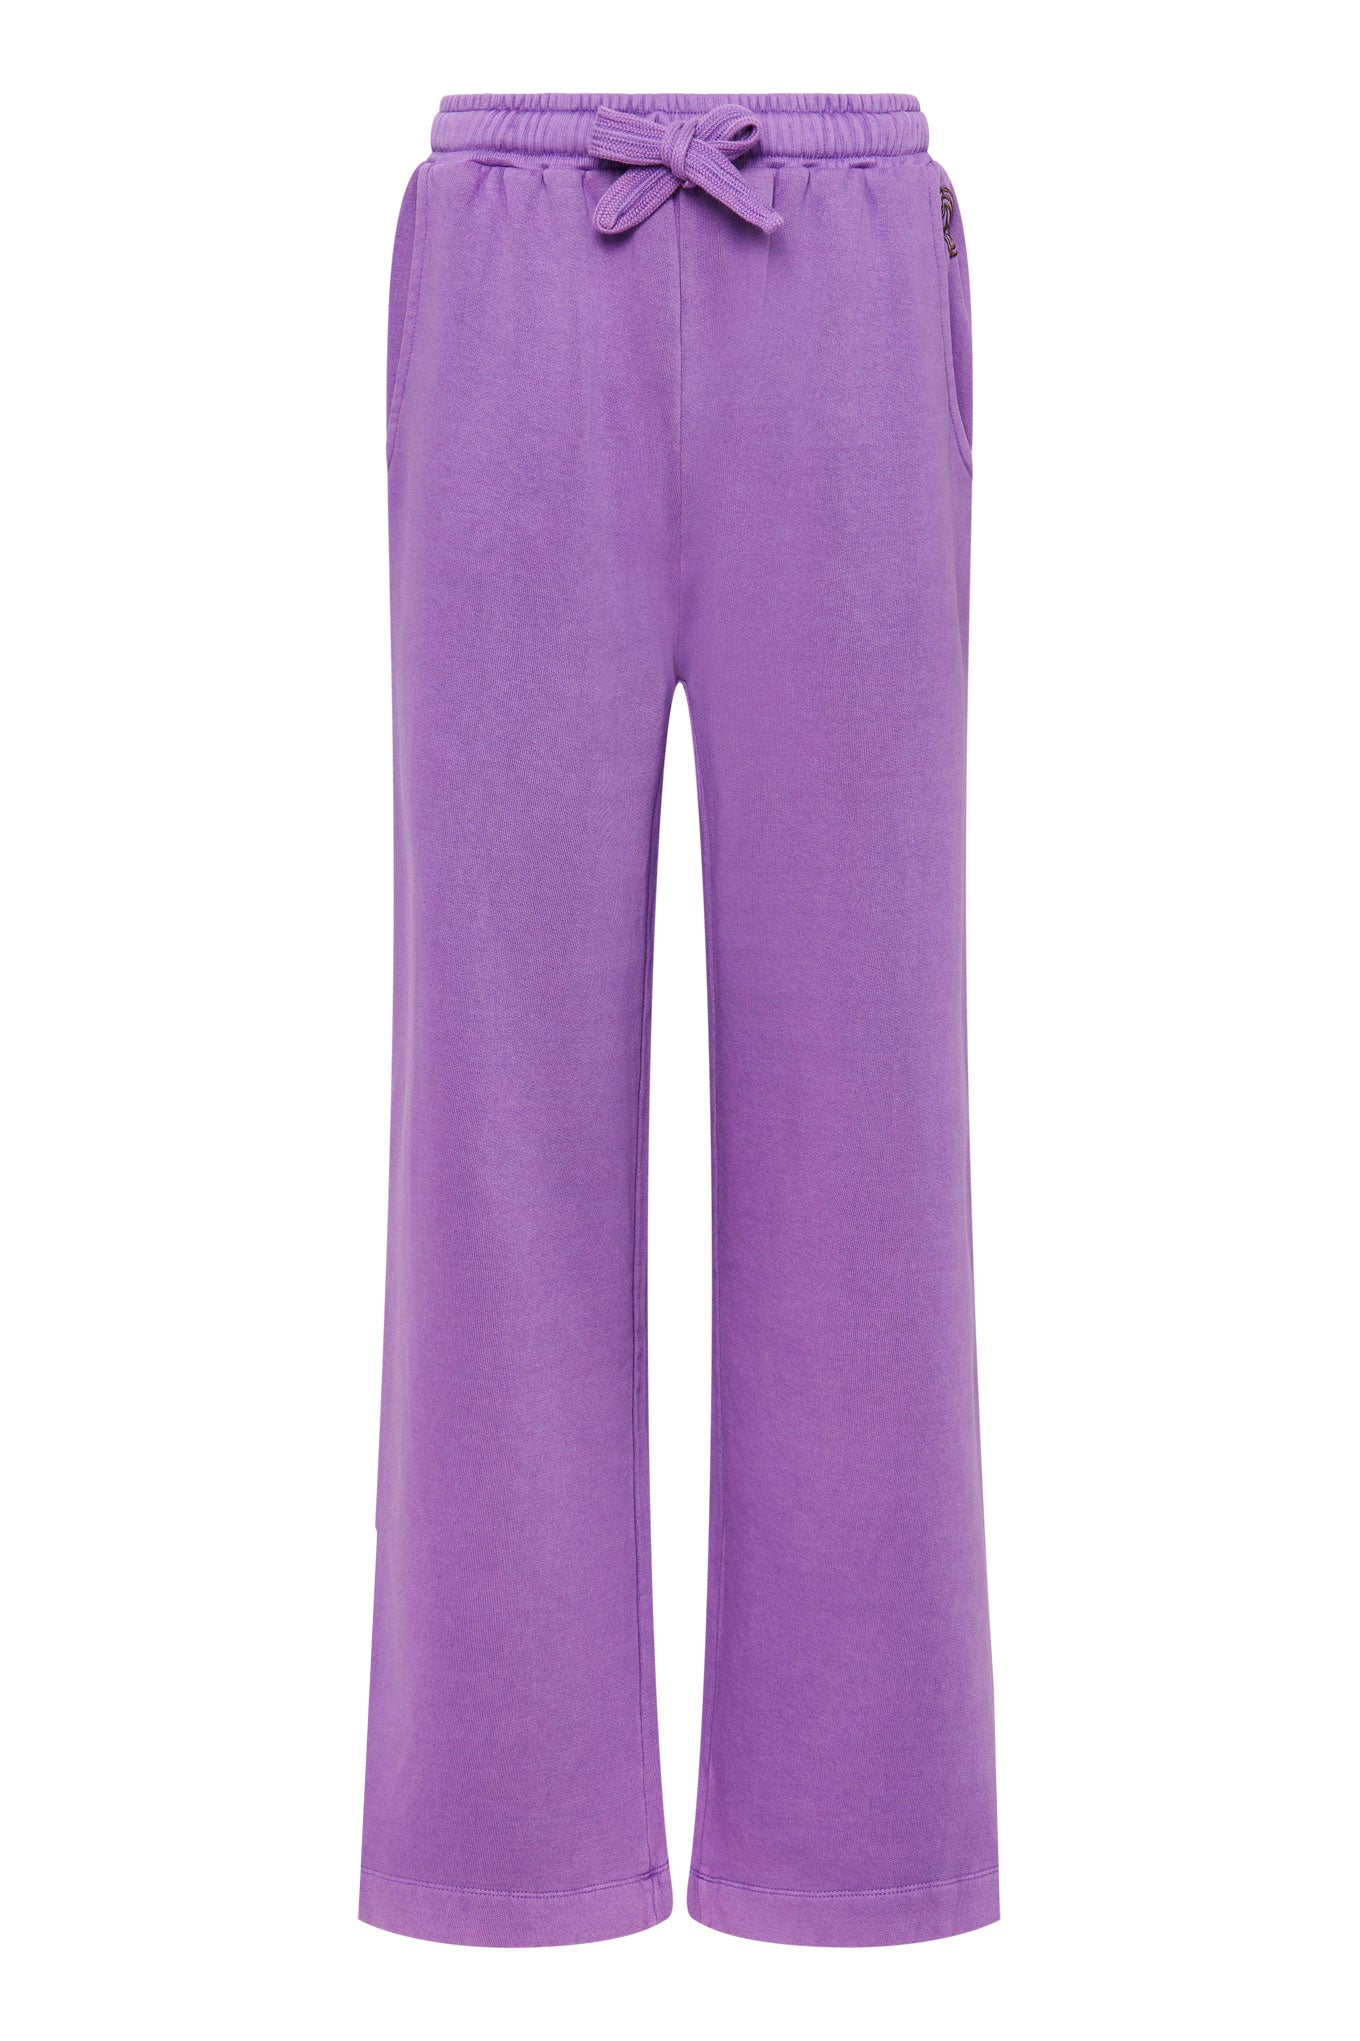 Purple, wide jogging pants SOLEIL made from 100% organic cotton by Komodo